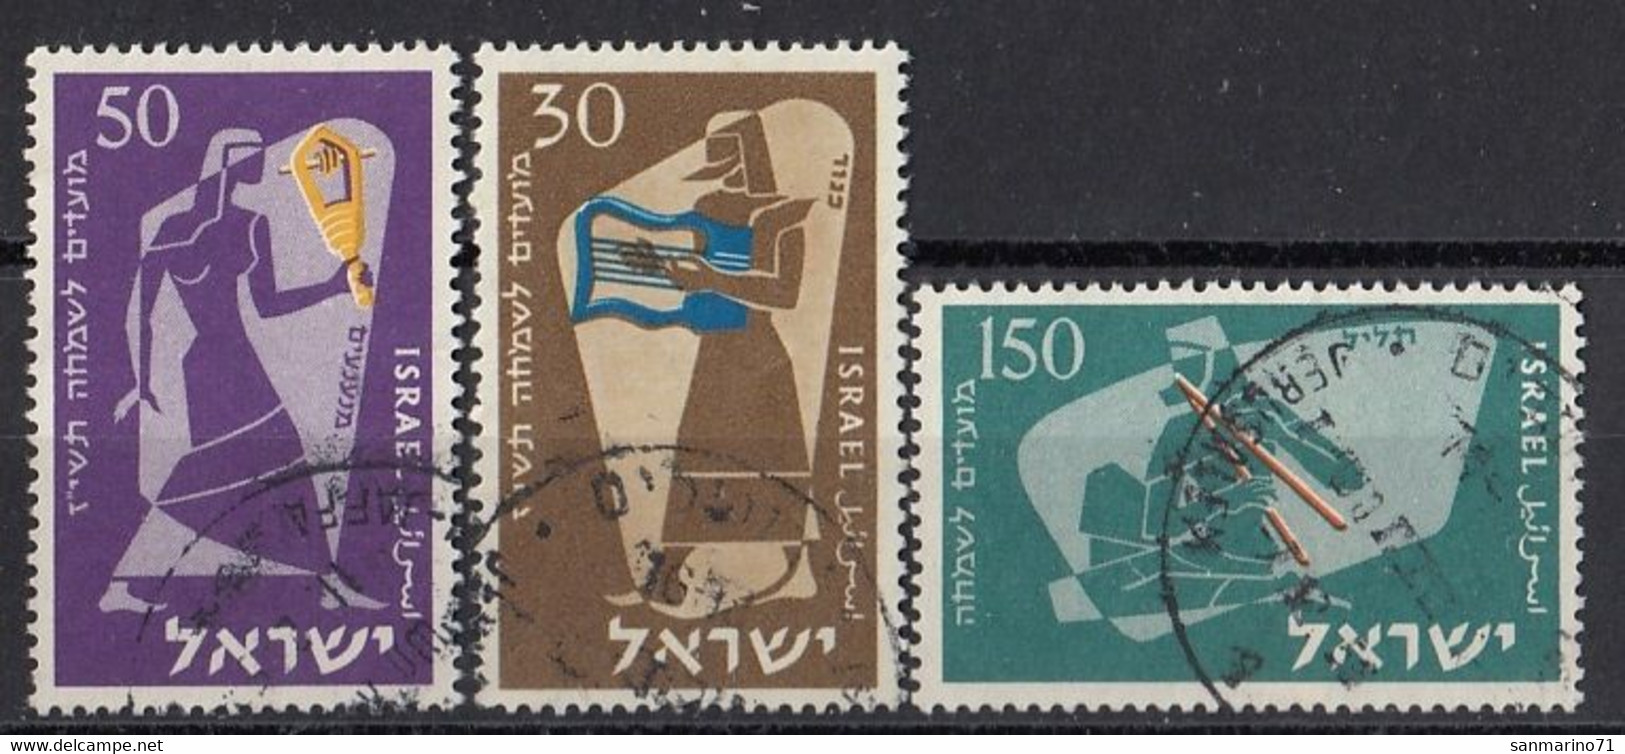 ISRAEL 135-137,used,falc Hinged - Used Stamps (without Tabs)